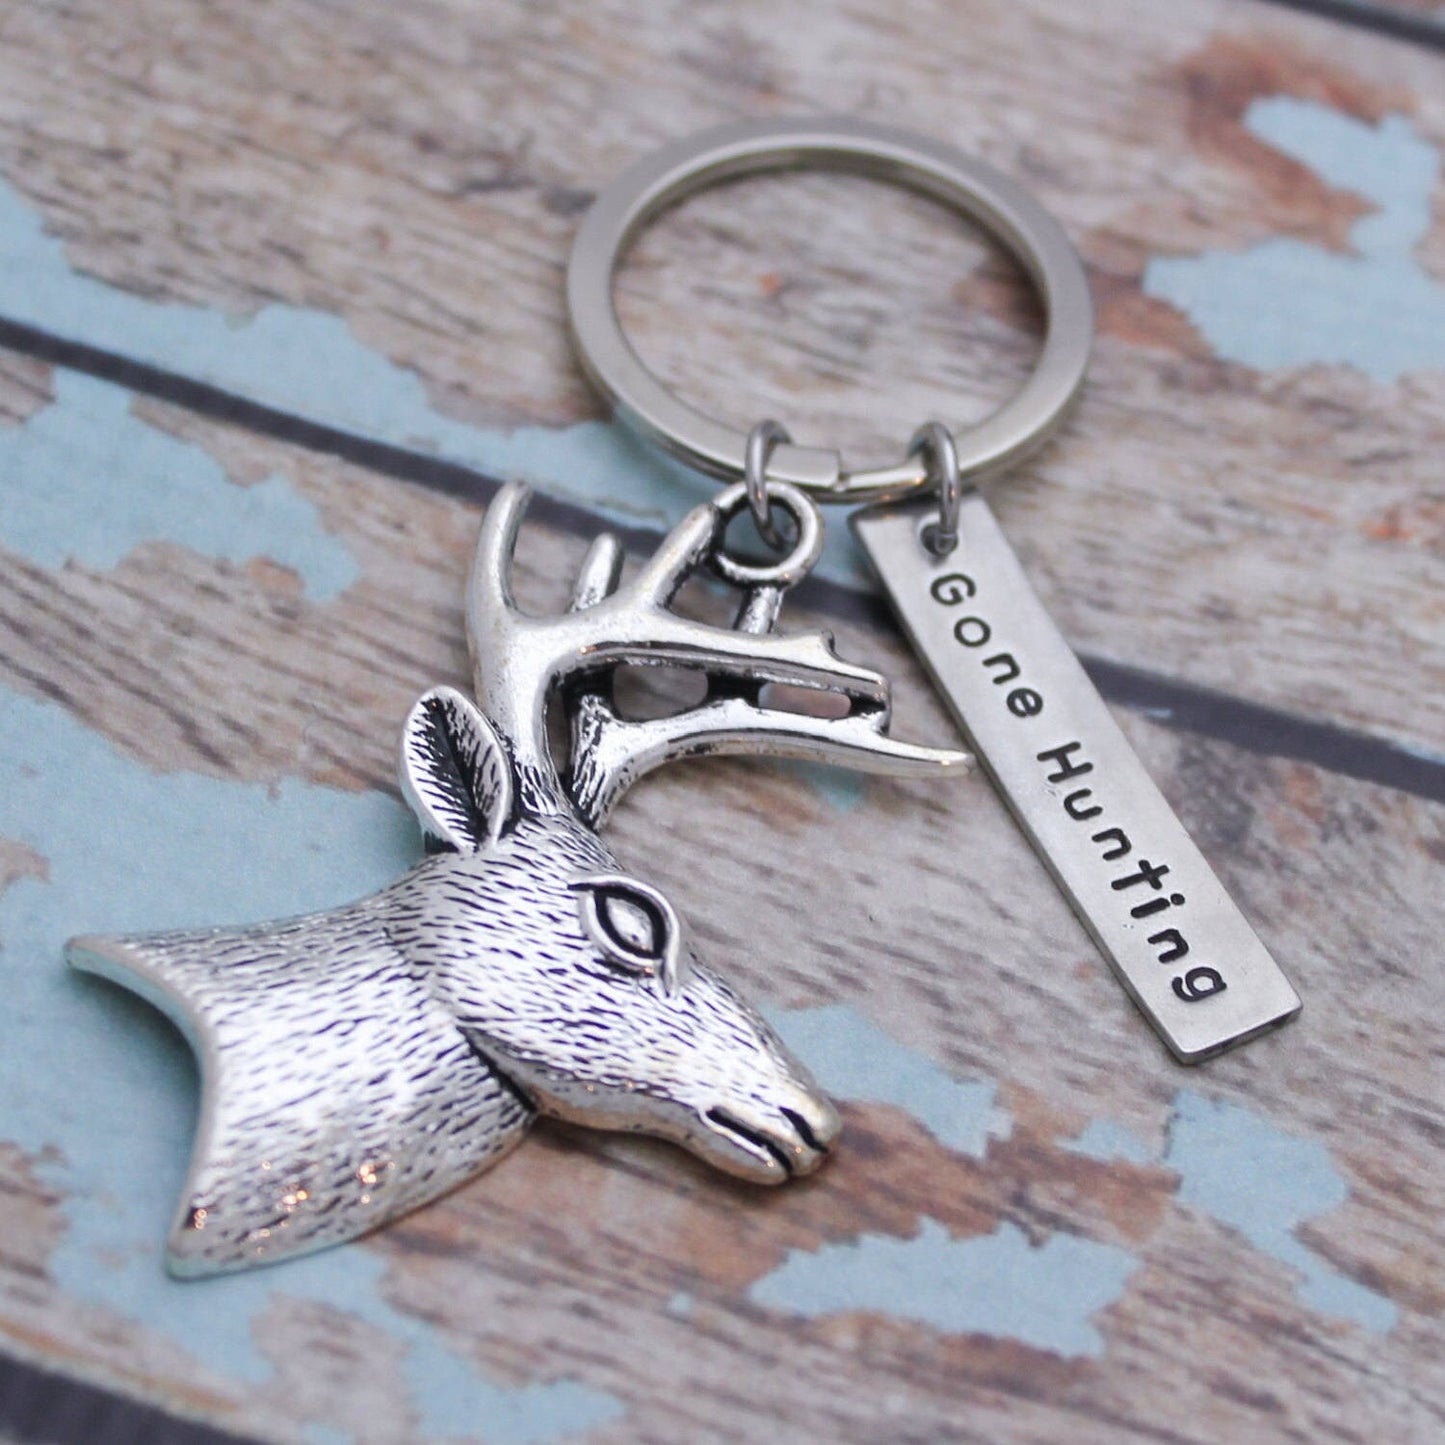 Gone Hunting Deer Buck Keychain, Personalized Hand Stamped Deer Keychain, Gift for Him, Hunting Gift, Gift for Hunter, Deer Key Chain